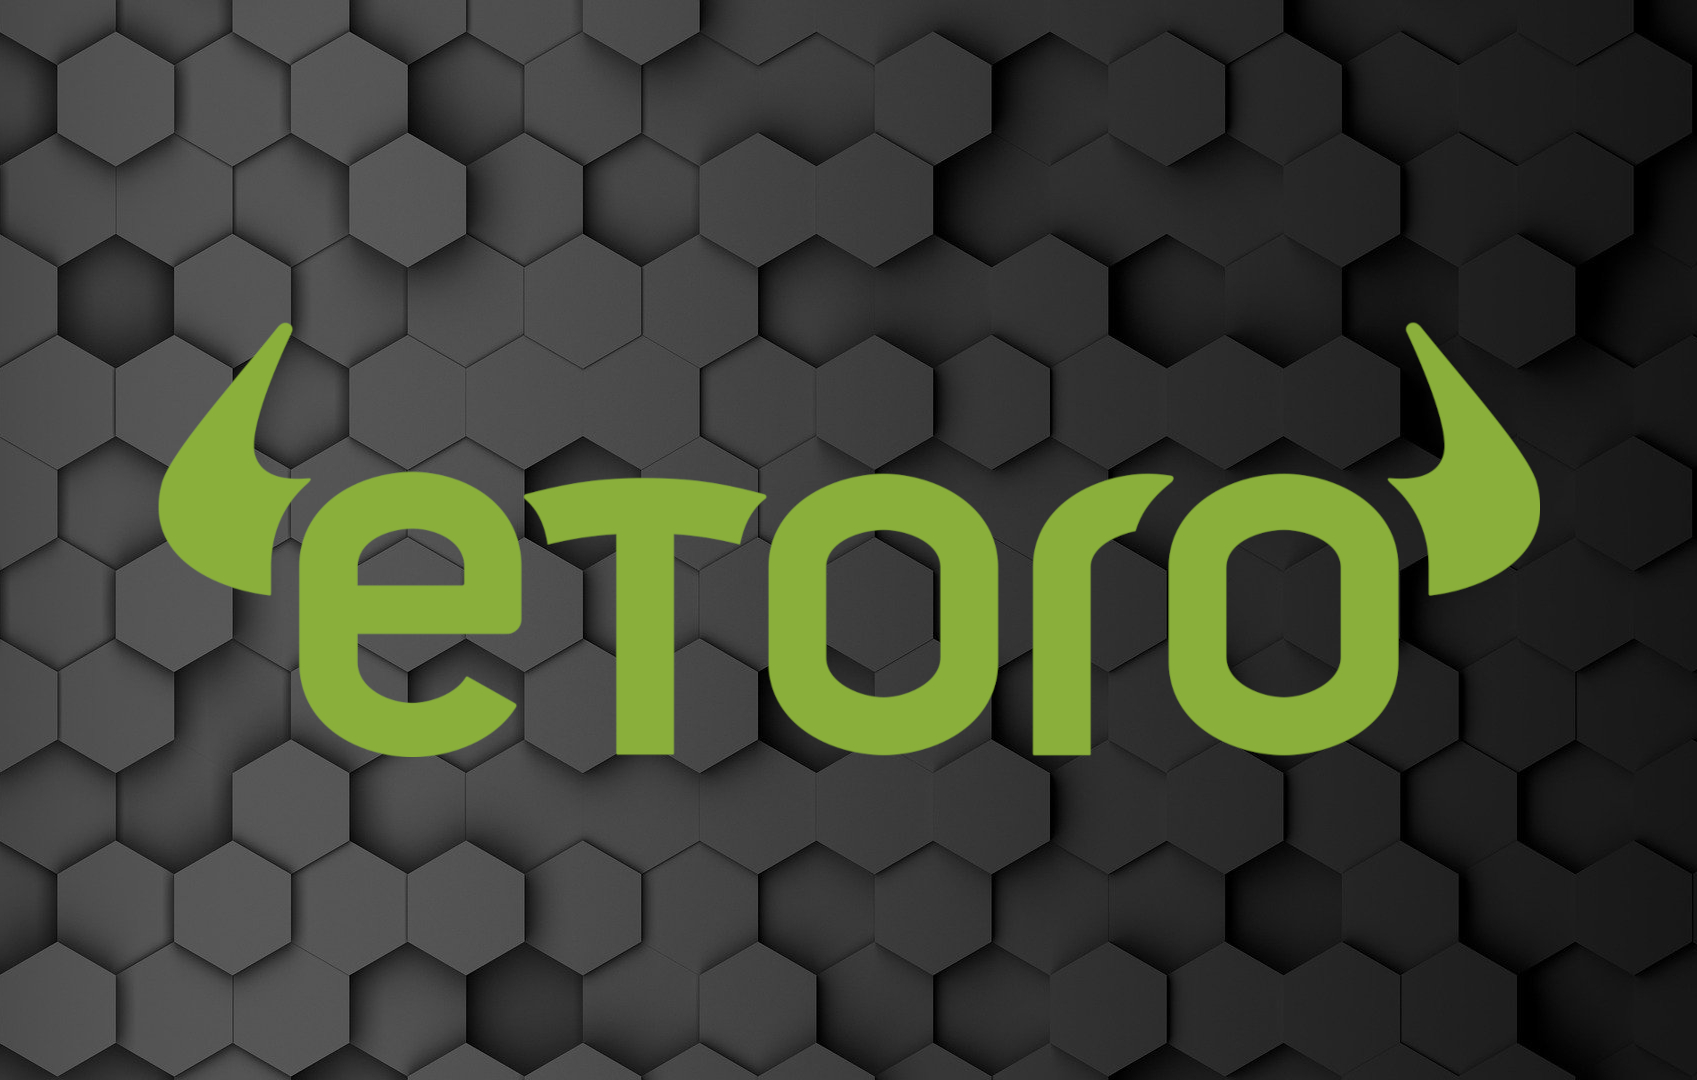 eToro is Delisting Cardano (ADA) and Tron (TRX), Cites Regulatory Concerns as the Root Cause